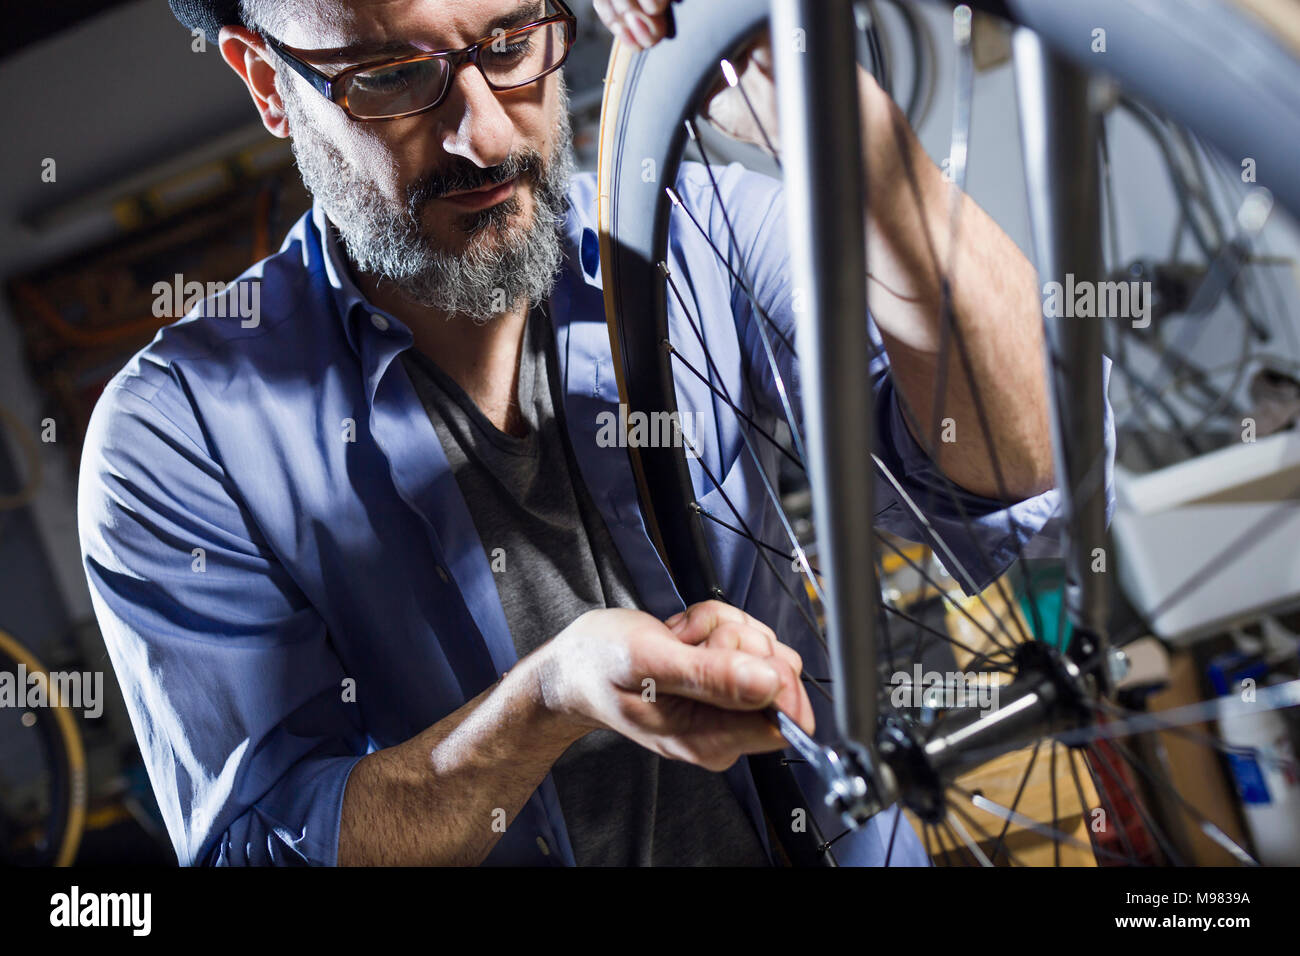 Man working on bicycle in workshop Stock Photo